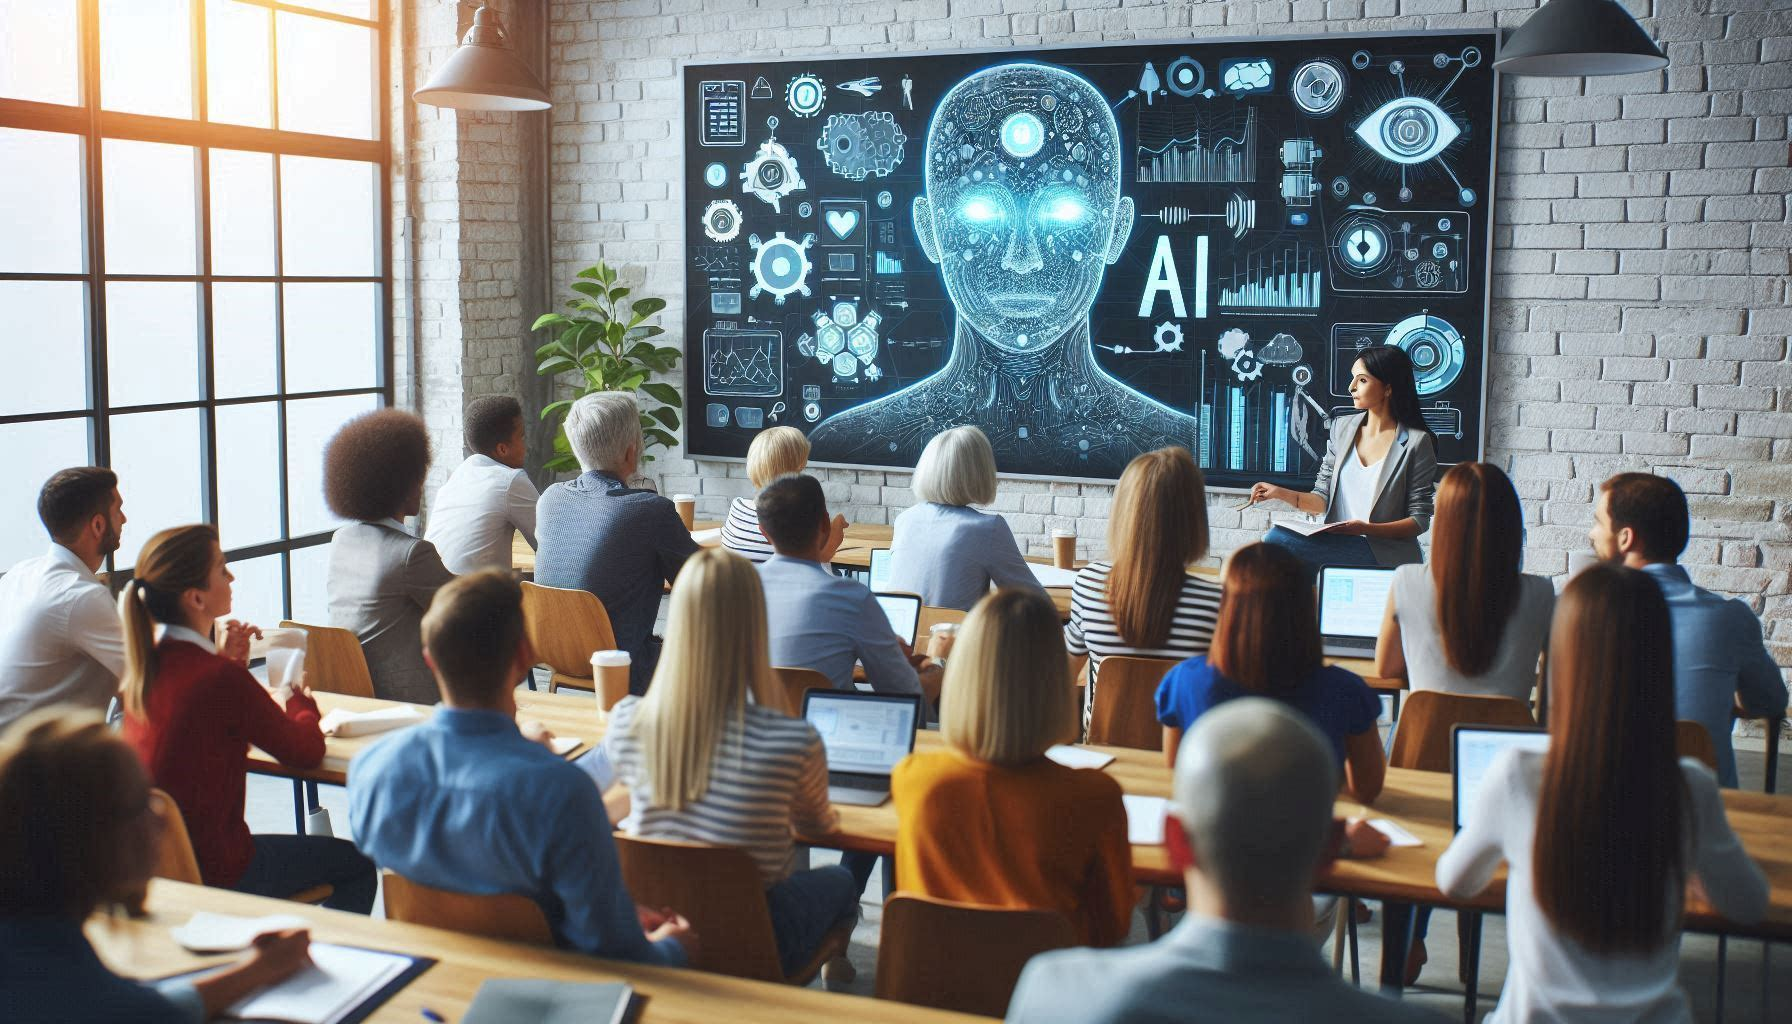 A diverse group of people learning about Trustworthy AI in a classroom setting.